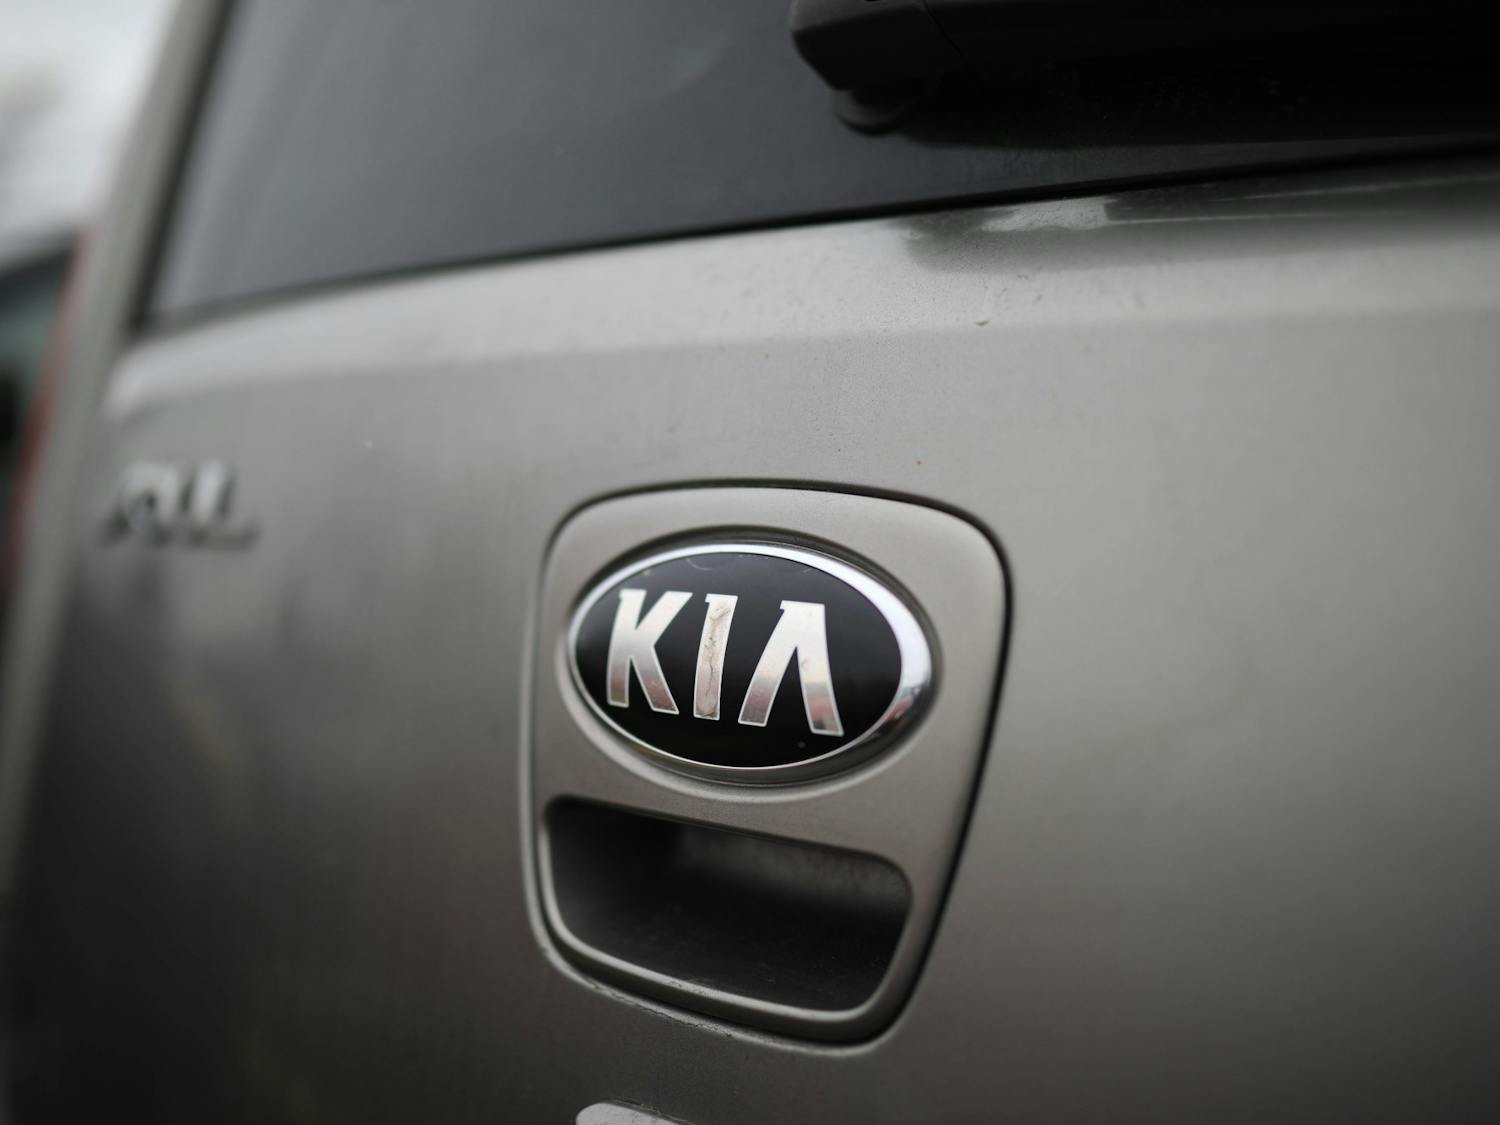 Hyundai and Kia owners on campus are being advised to take extra security precautions when locking their vehicles.